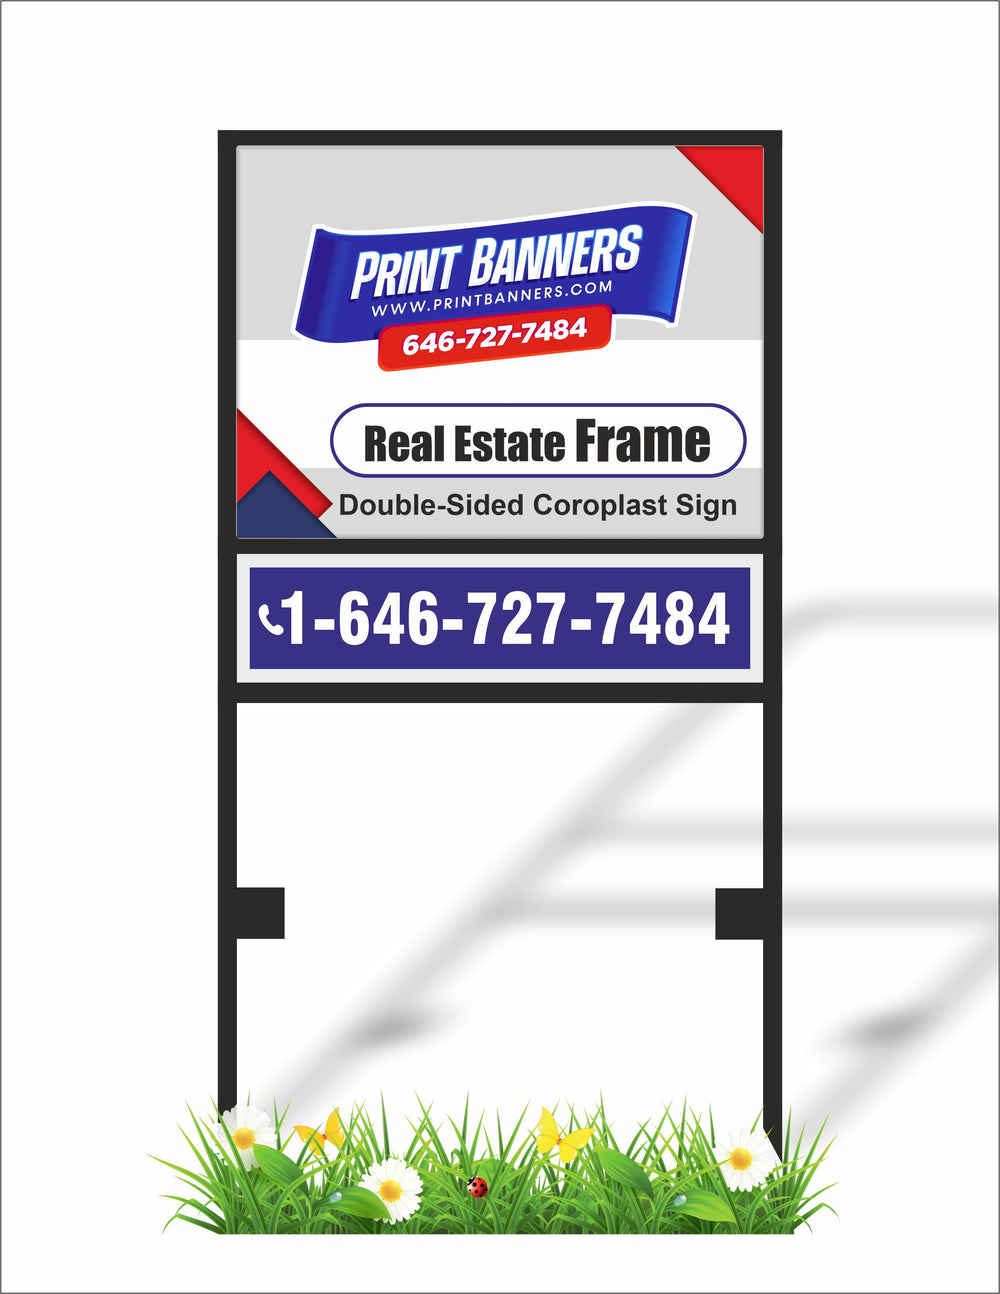 Real Estate Frame - Print Banners NYC